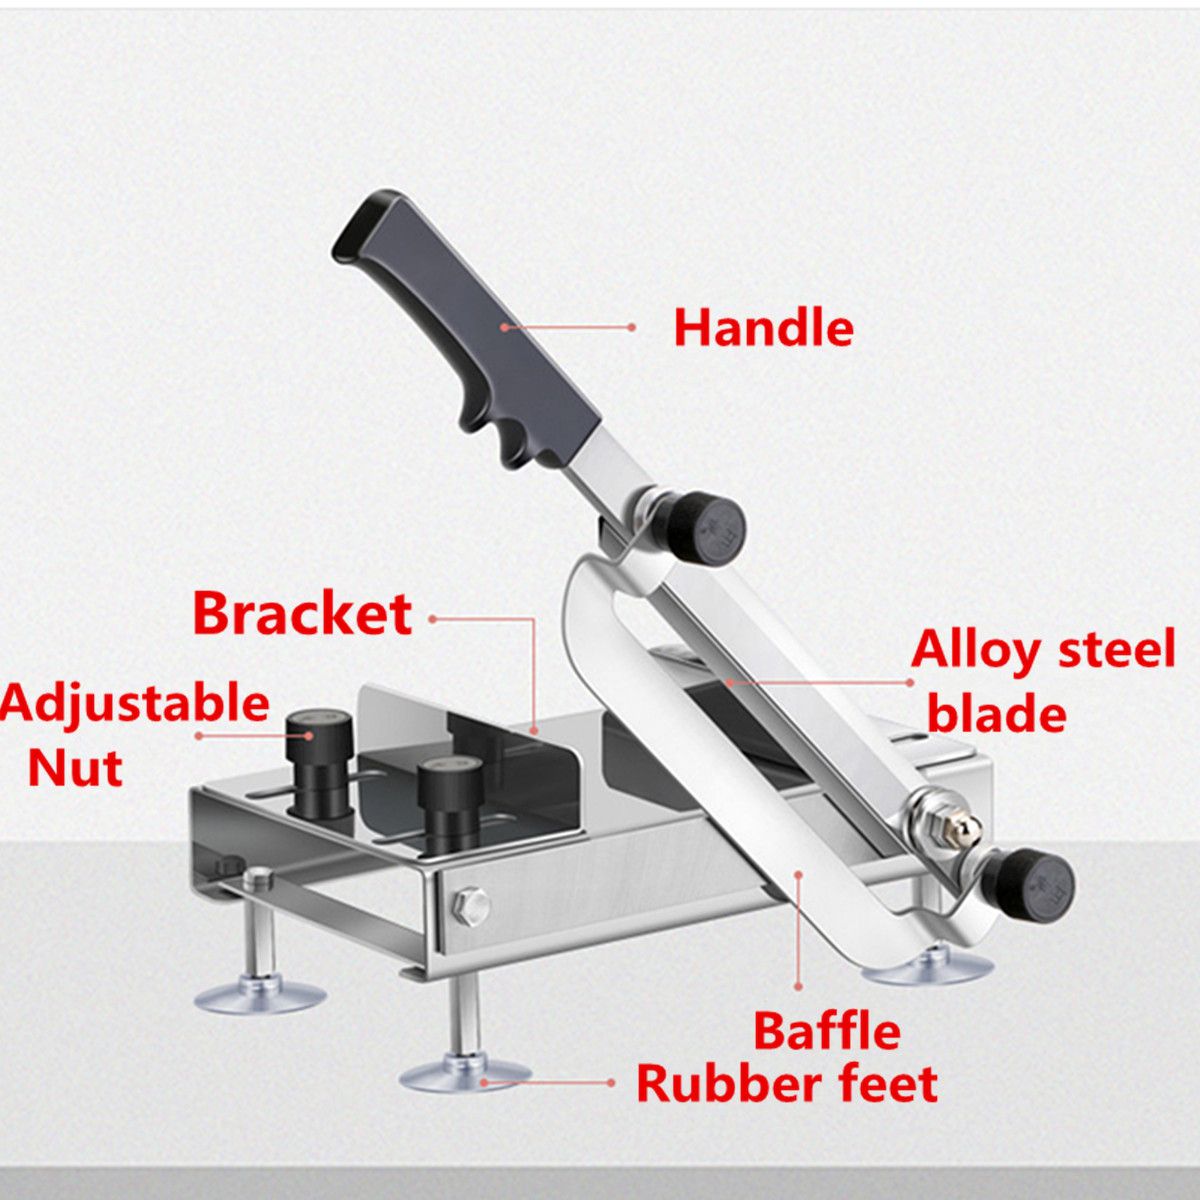 Manual-Food-Meat-Slicer-Stainless-Steel-Food-Meat-Cutter-Machine-Adjustable-Thickness-1381448